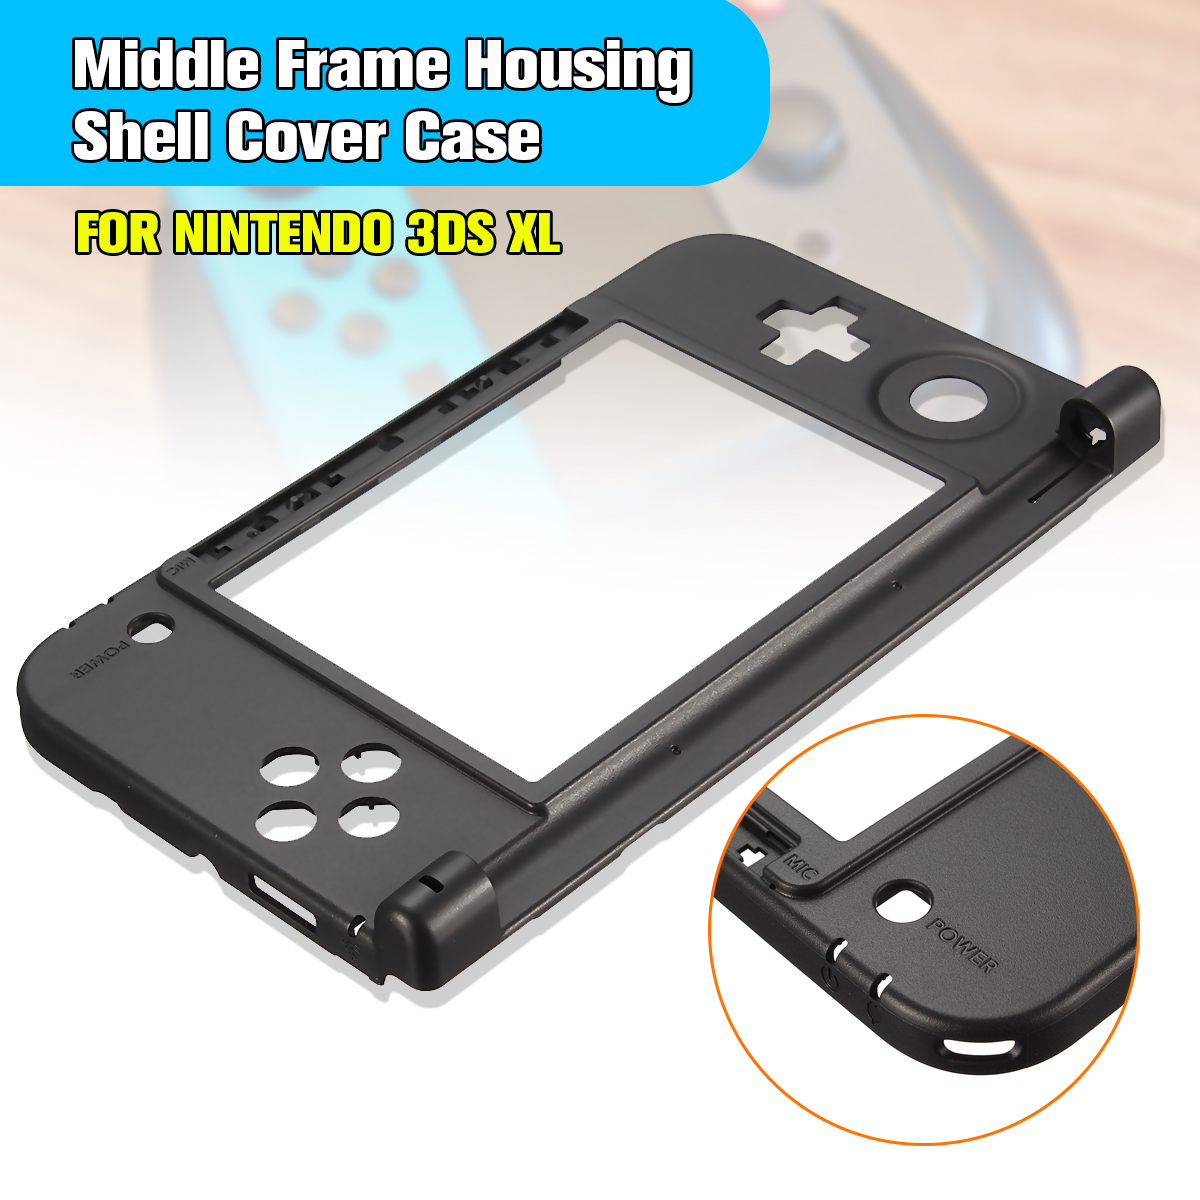 Replacement Bottom Middle Frame Housing Shell Cover Case for Nintendo 3DS XL 3DS LL Game Console 49